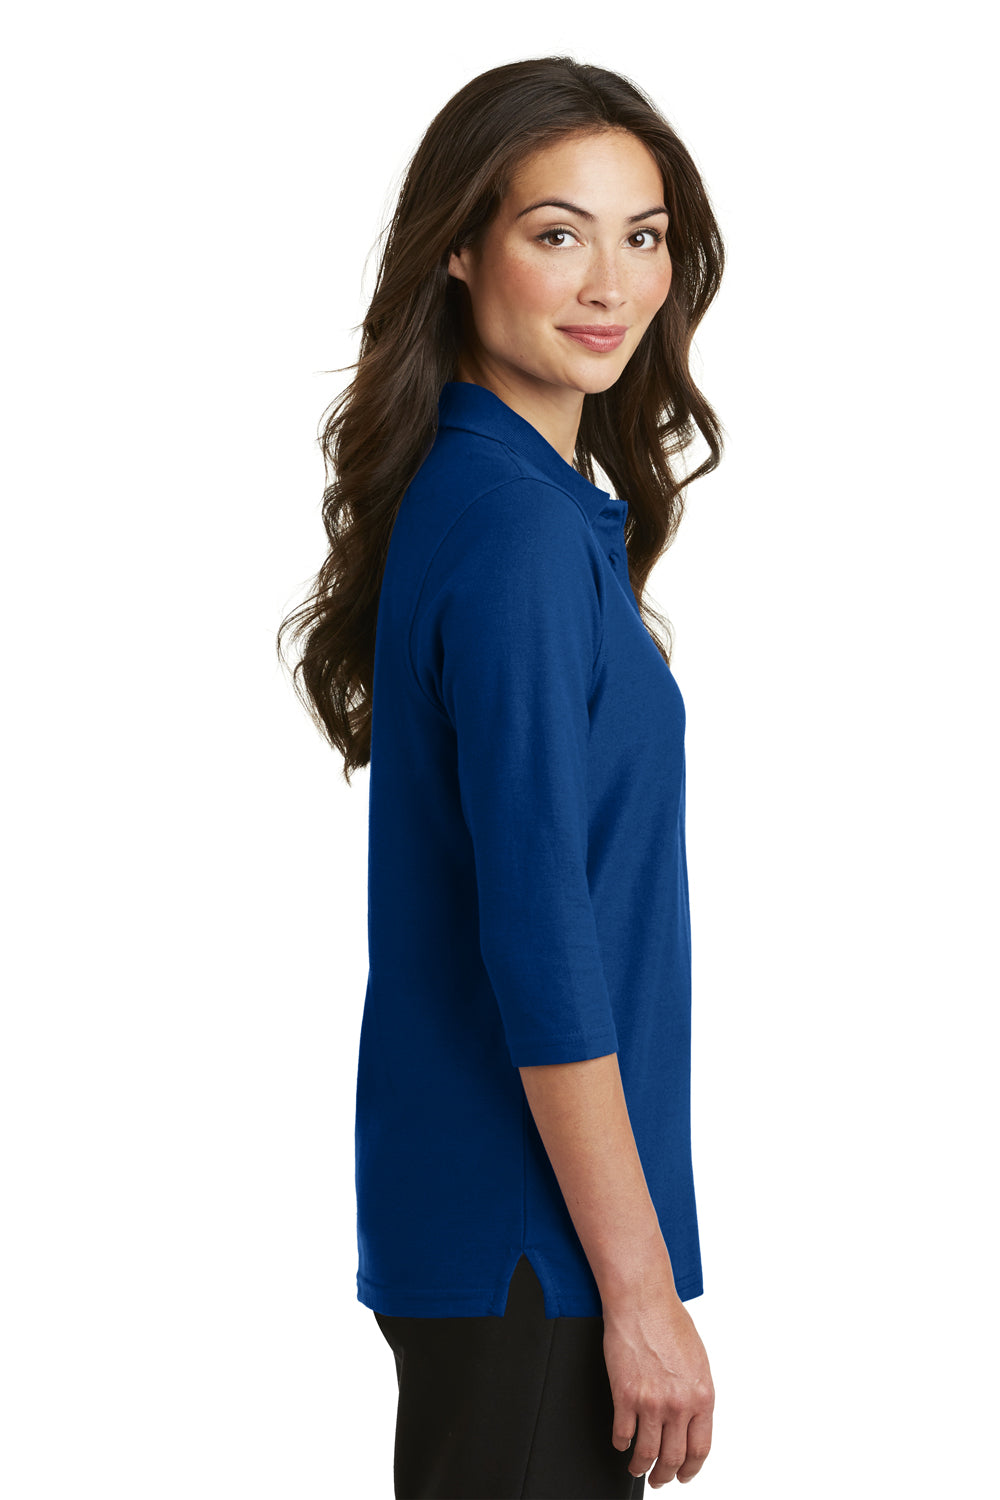 Port Authority L562 Womens Silk Touch 3/4 Sleeve Polo Shirt Royal Blue Side